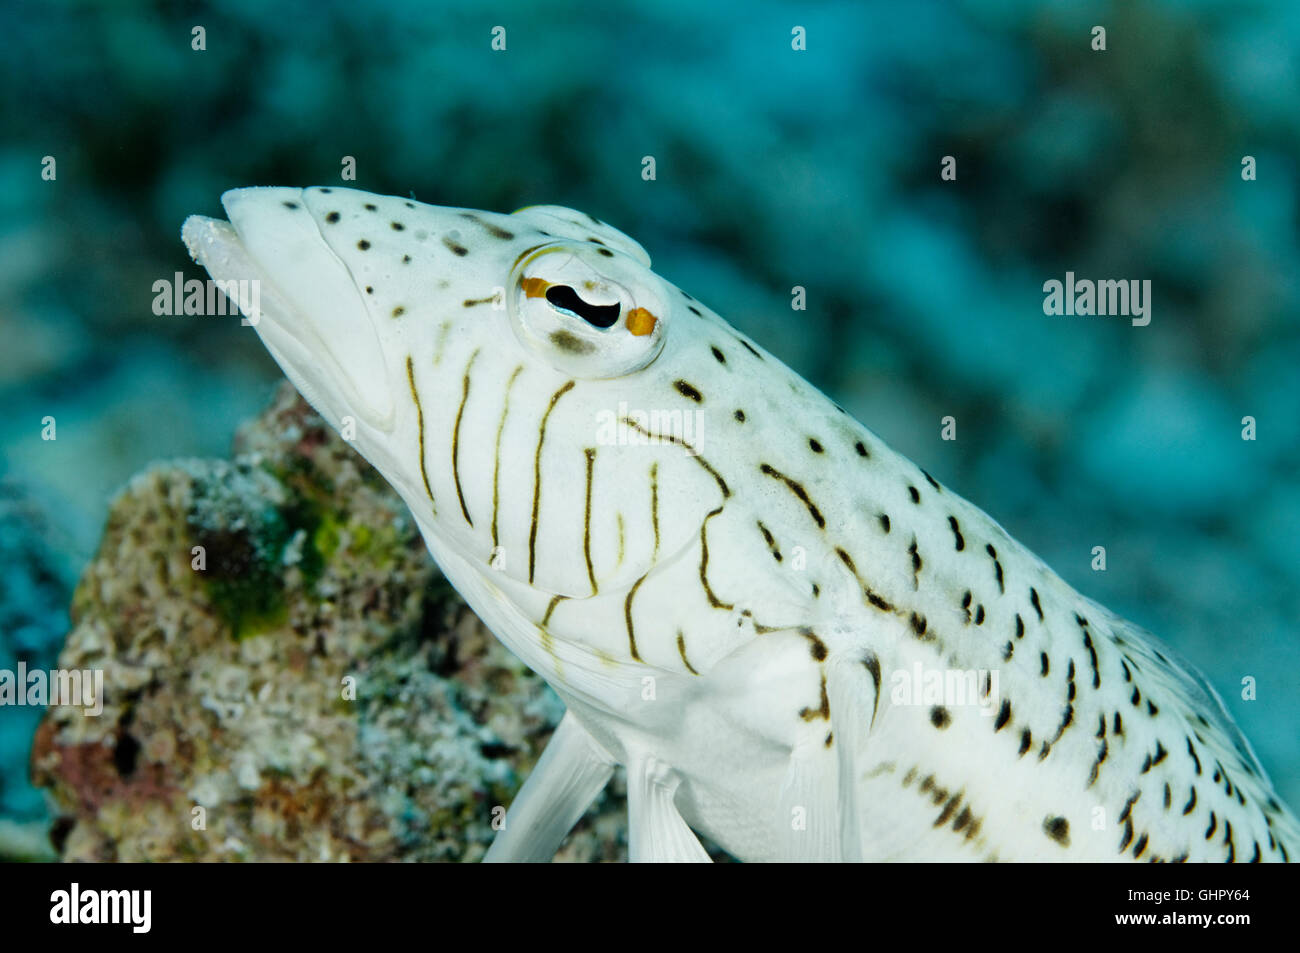 Parapercis hexophtalma, Speckled sandperch male, Paradise Reef, Red Sea, Egypt, Africa Stock Photo